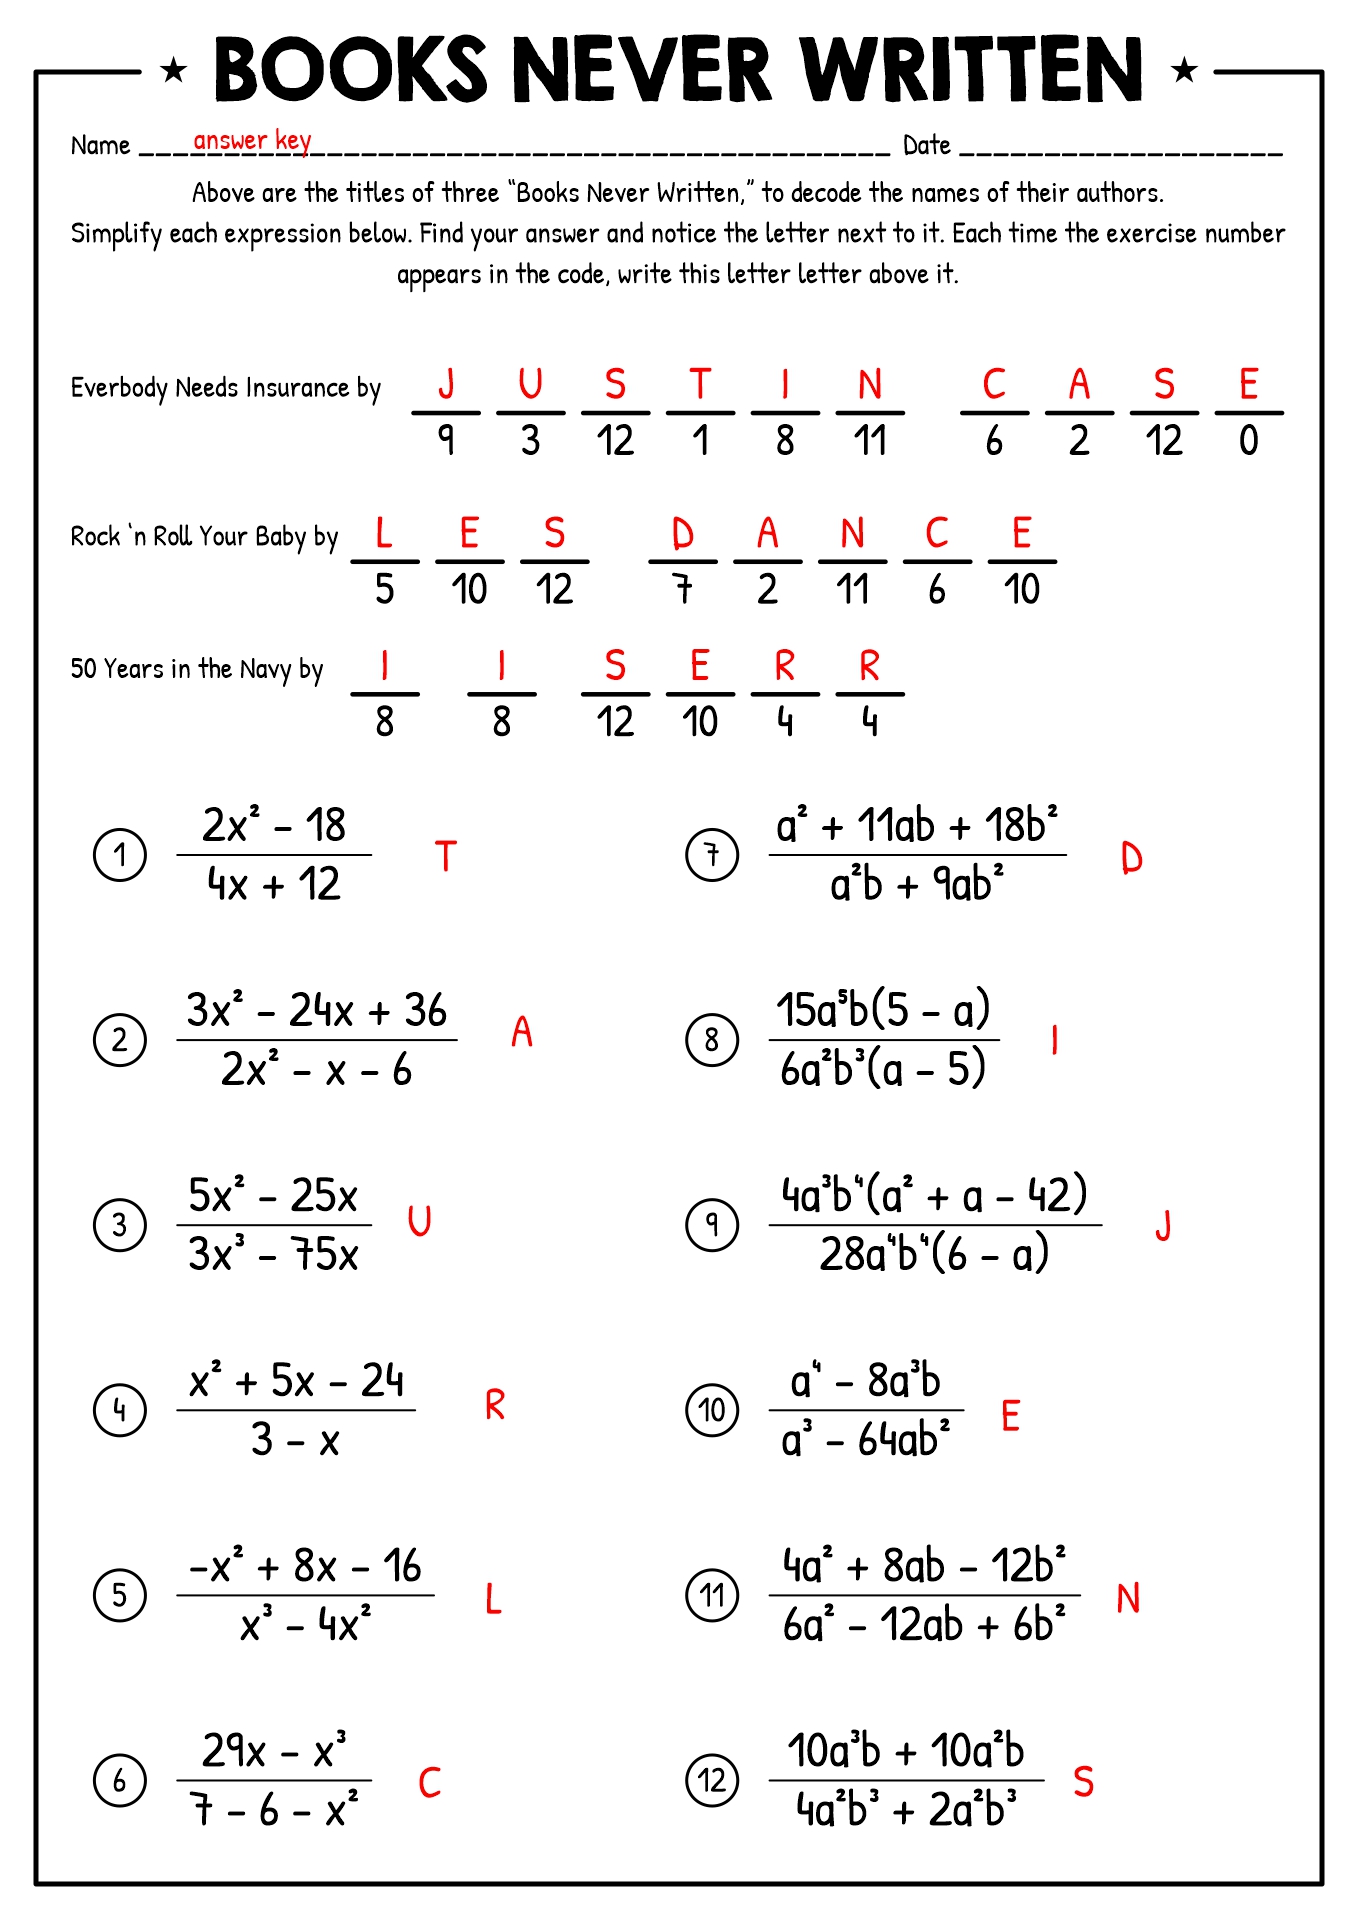 10 Best Images of Proportion Problems Worksheet - 6th Grade Ratio